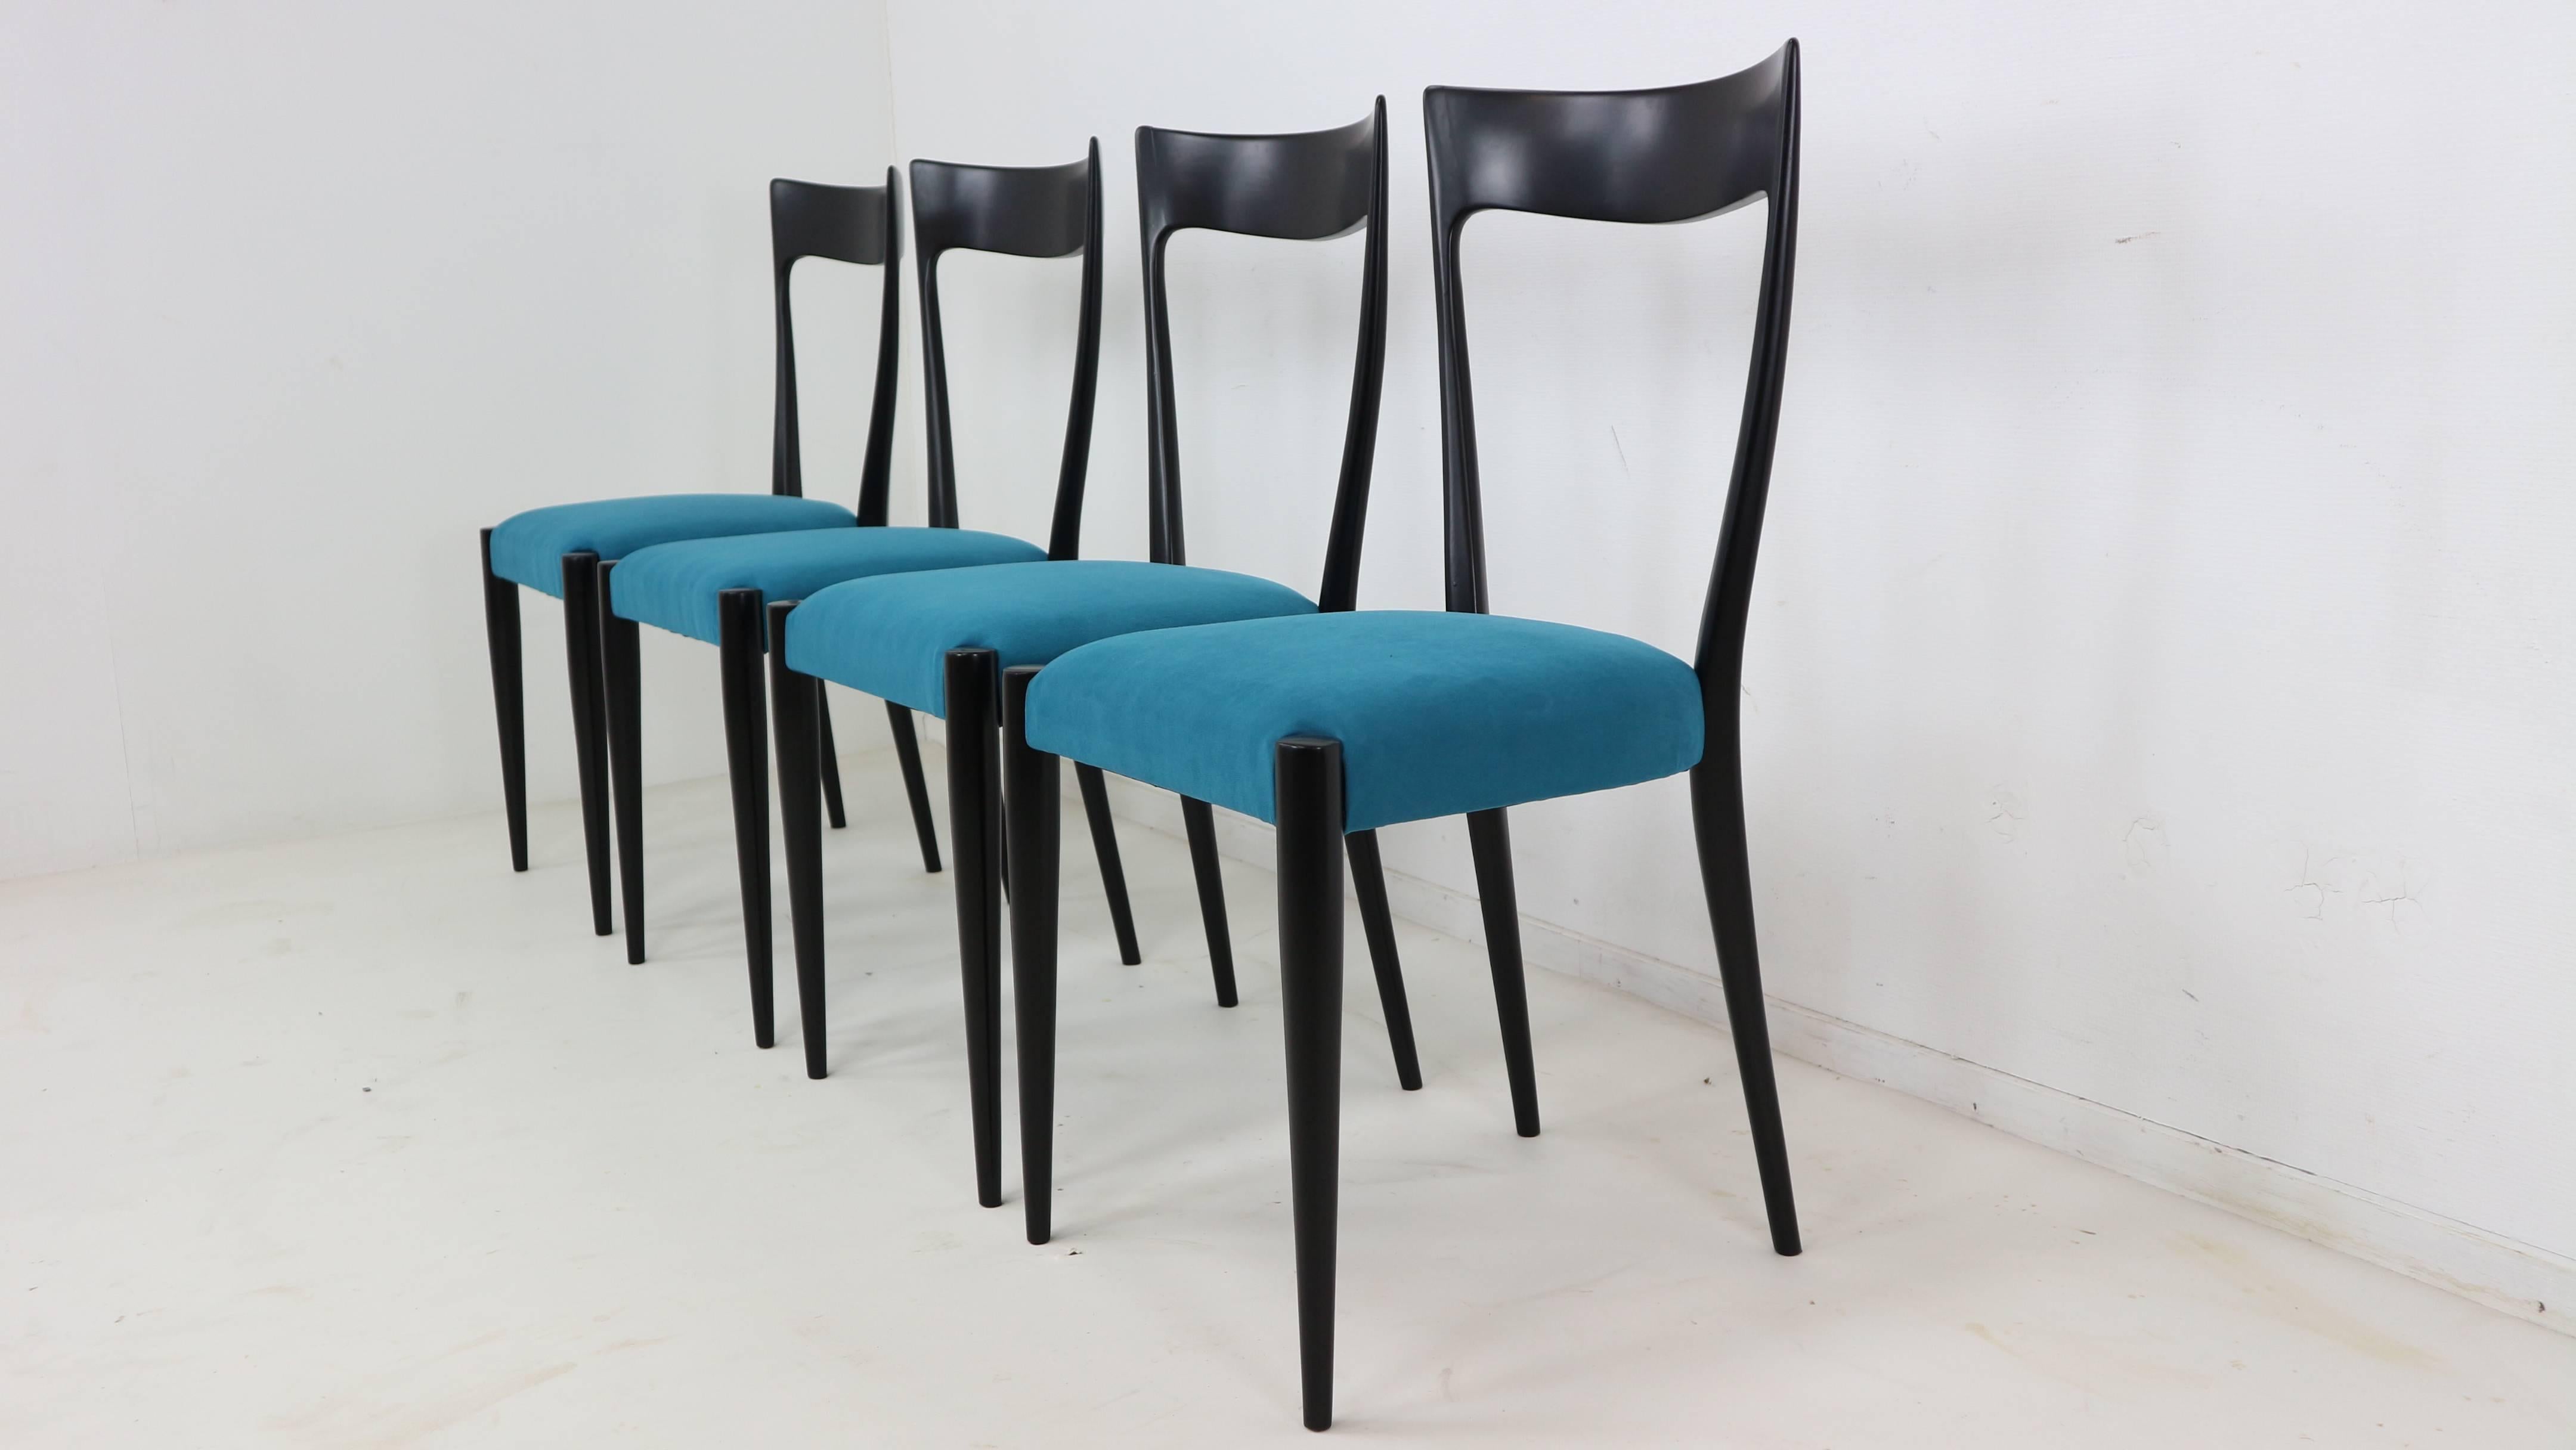 Set of four Italian modern dining chairs, designed by Melchiorre Bega, Italian, circa 1950s. These chairs are refinished and reupholstered in blue velvet.